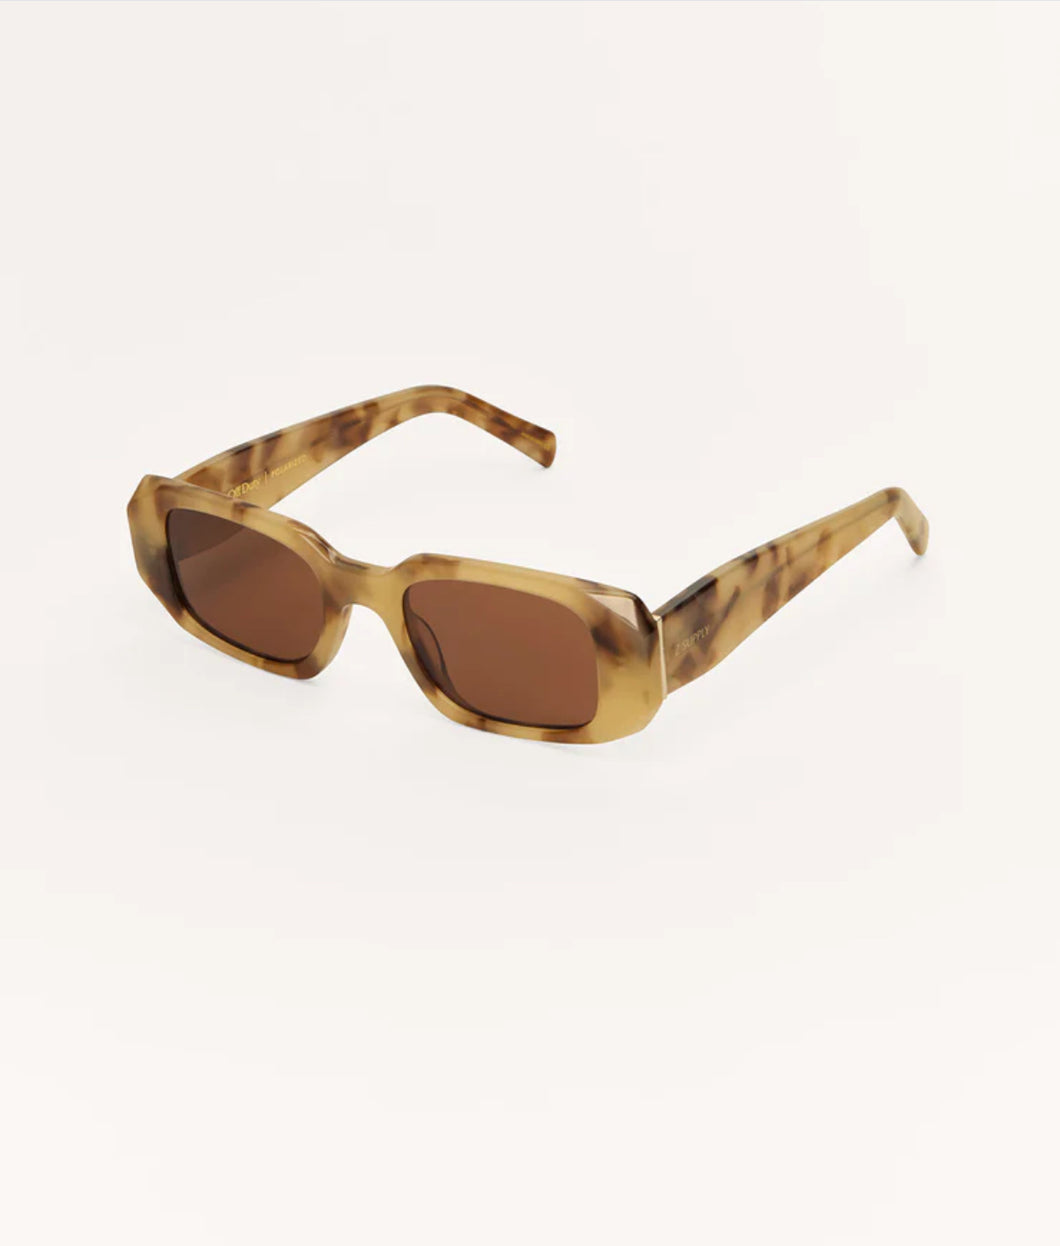 Z Supply: Off Duty Polarized Sunglasses in Brown Tortoise